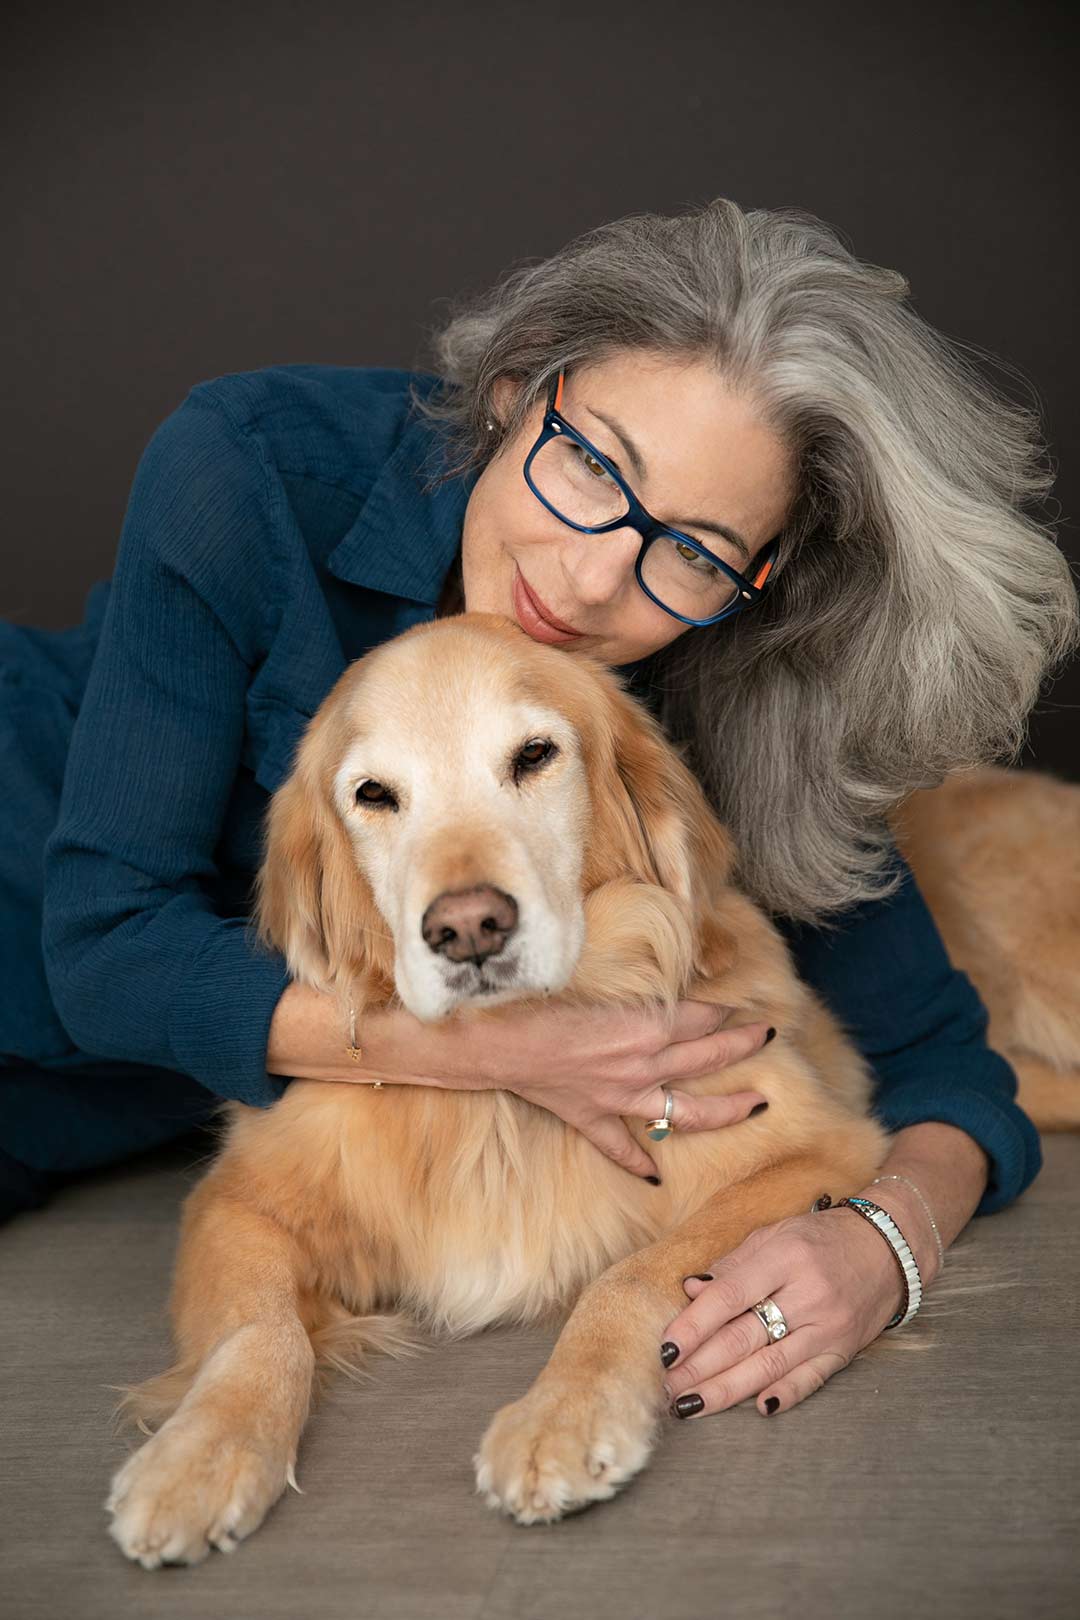 An older woman leans over her dog as her sweet personality is captured for her business portrait